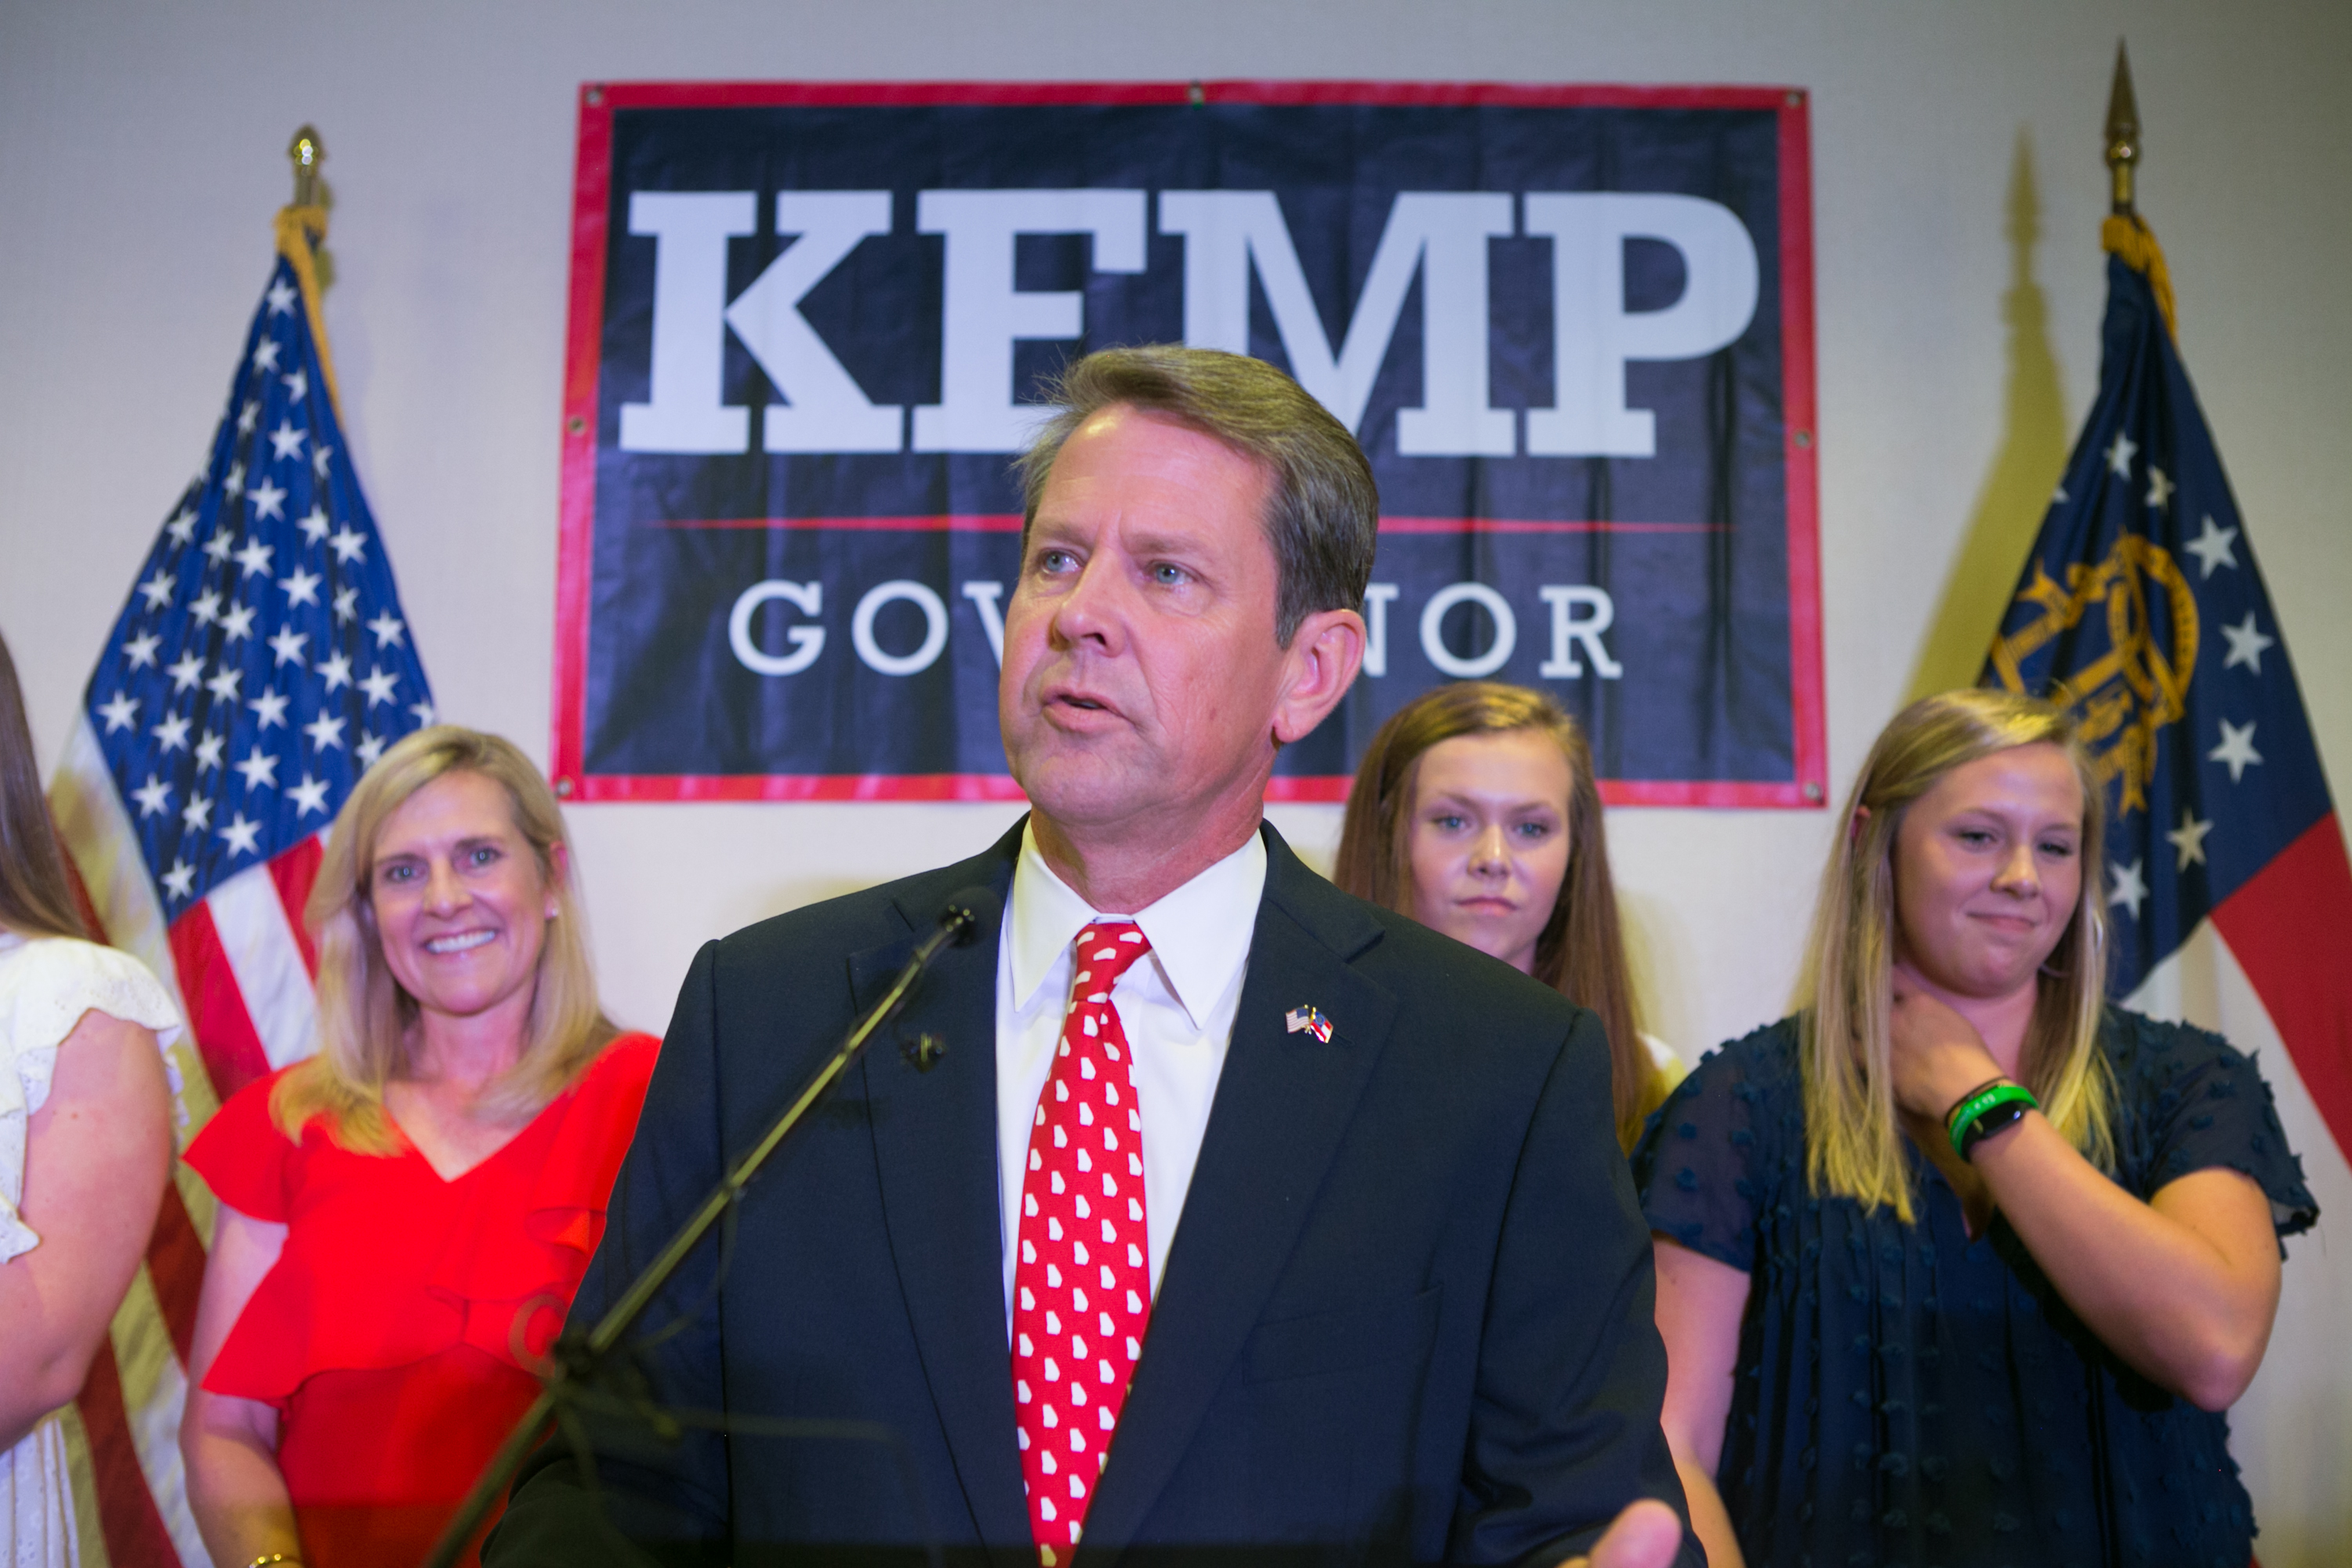 Secretary of State Brian Kemp addresses the audience and declares victory during an election watch party on July 24, 2018 in Athens, Georgia. (Photo by Jessica McGowan/Getty Images)